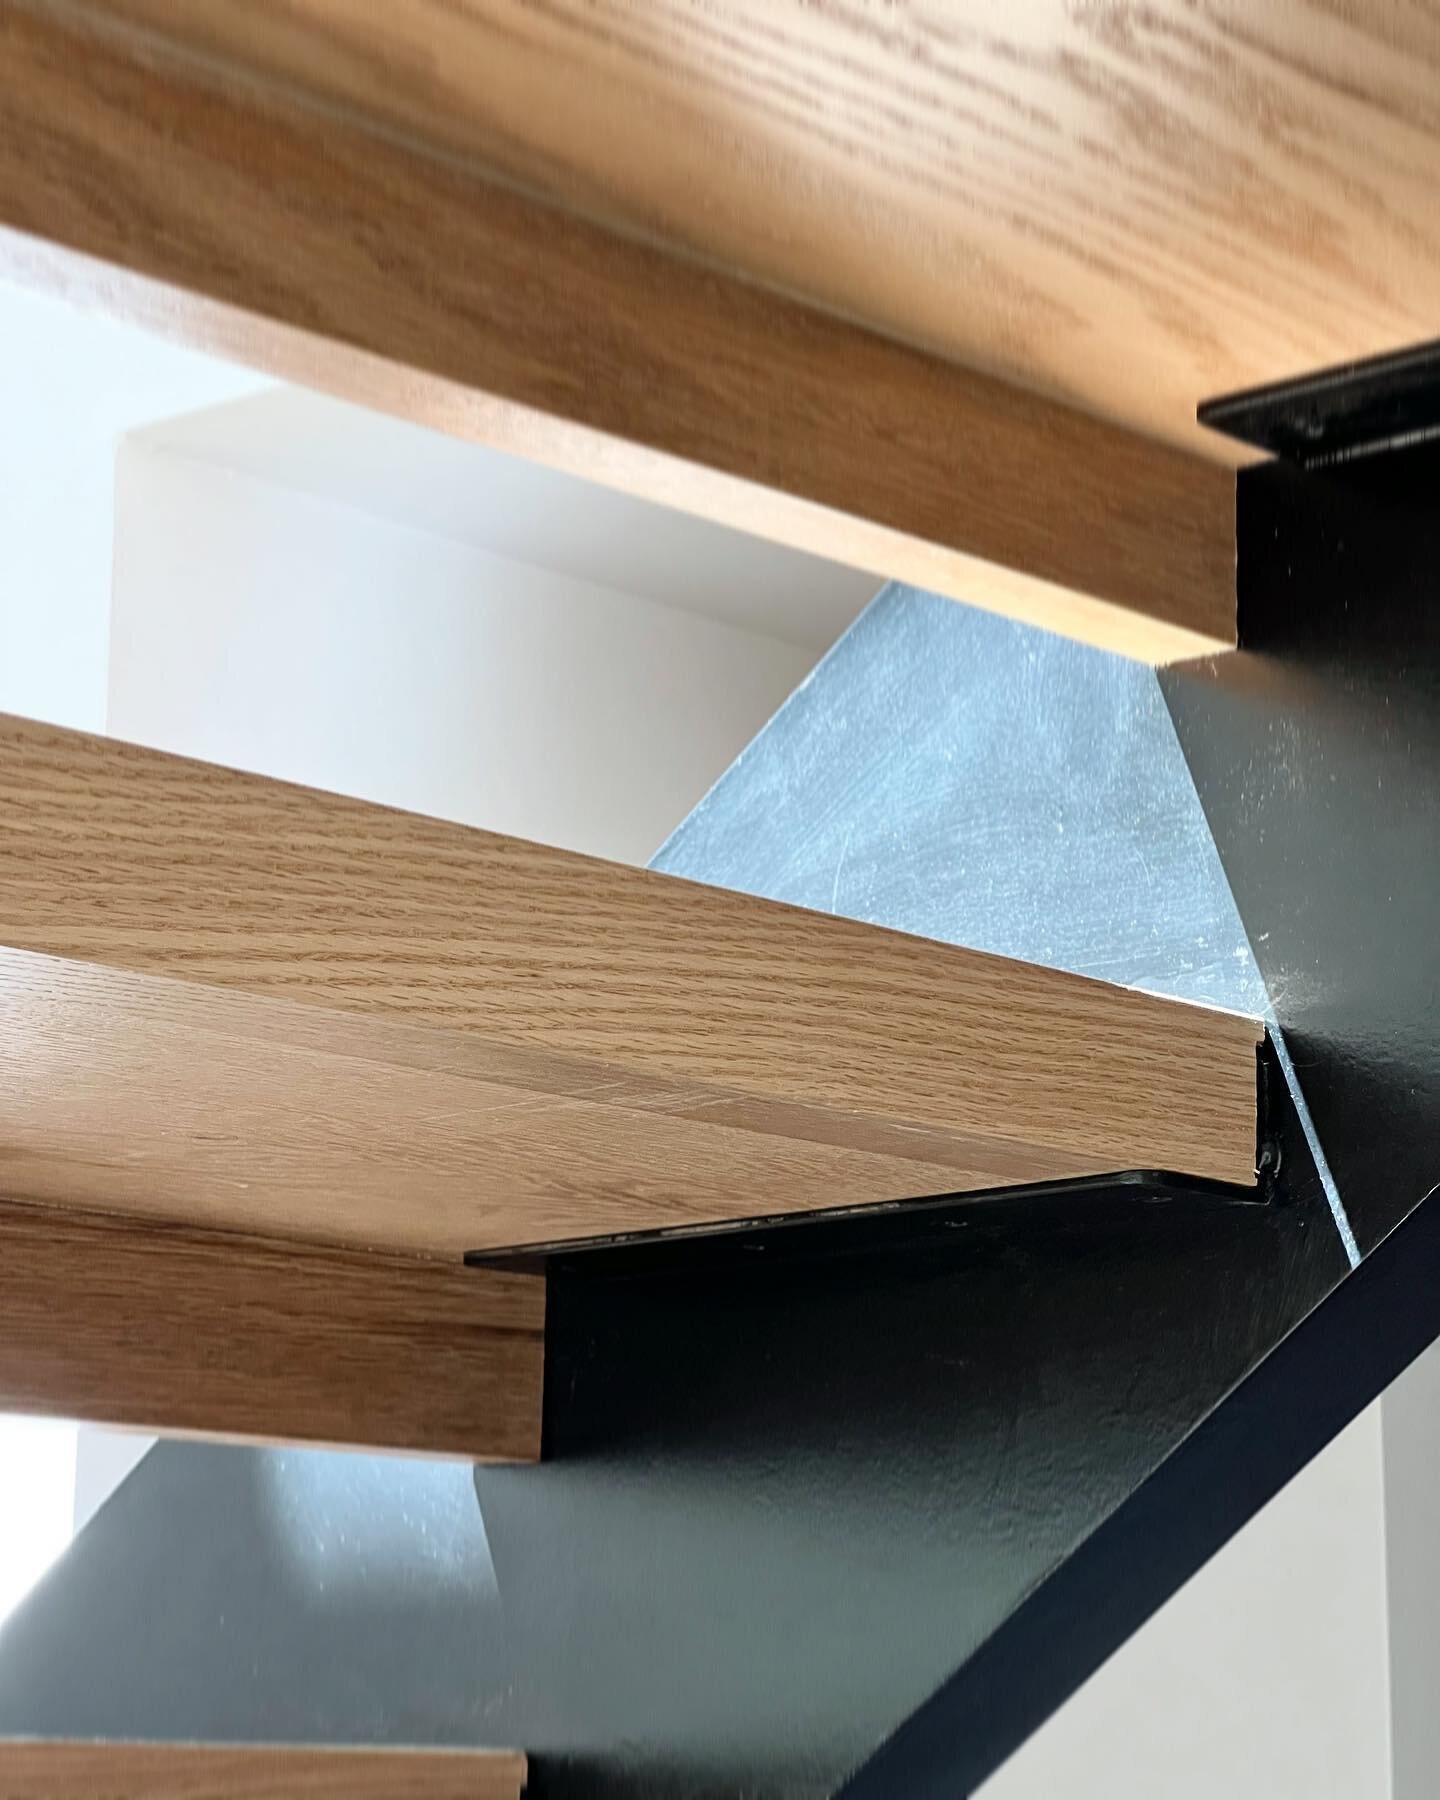 Stair tread detail on a recent project. #architecture #stairs #design